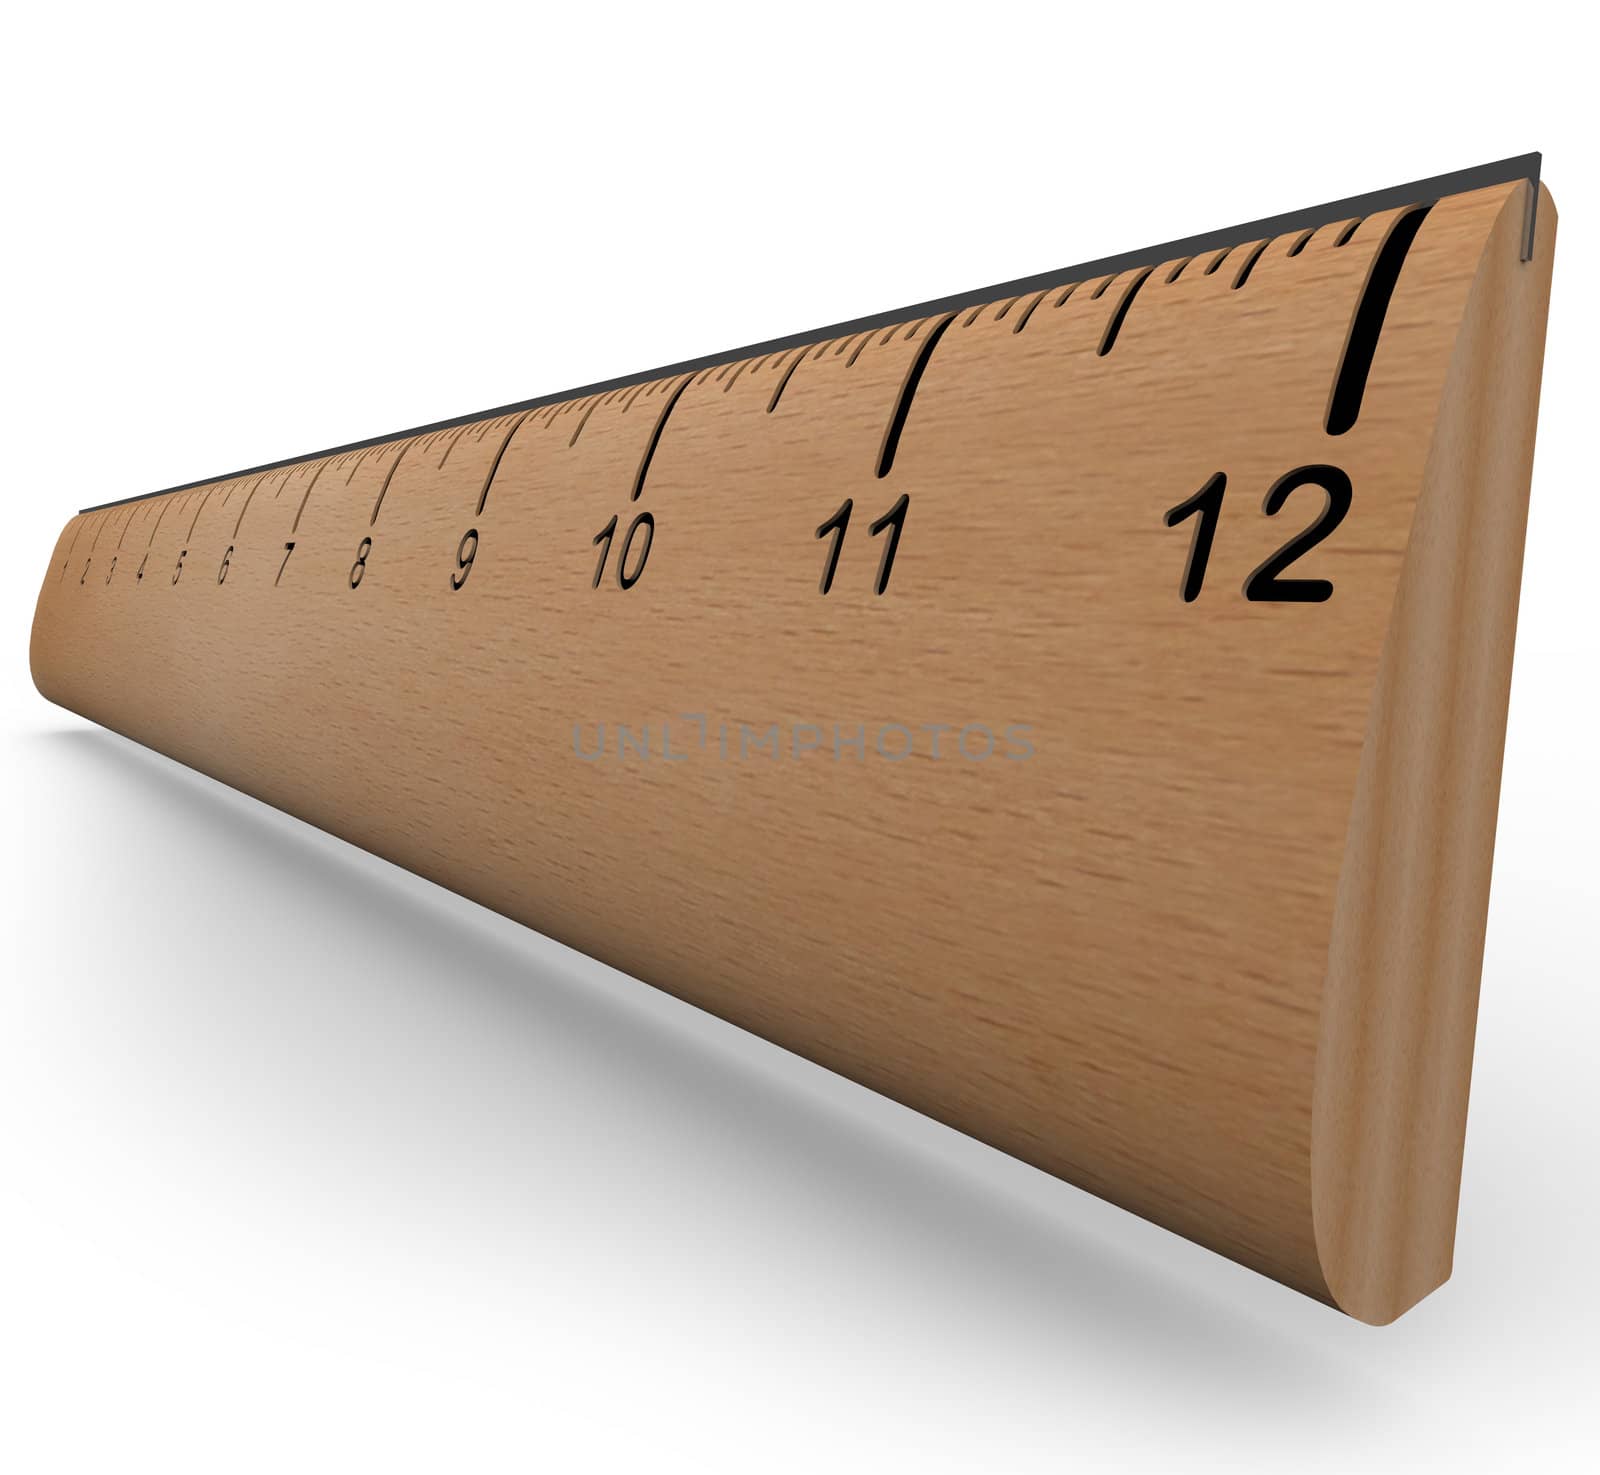 Wooden Ruler to Measure an Object in Experiment or Research by iQoncept